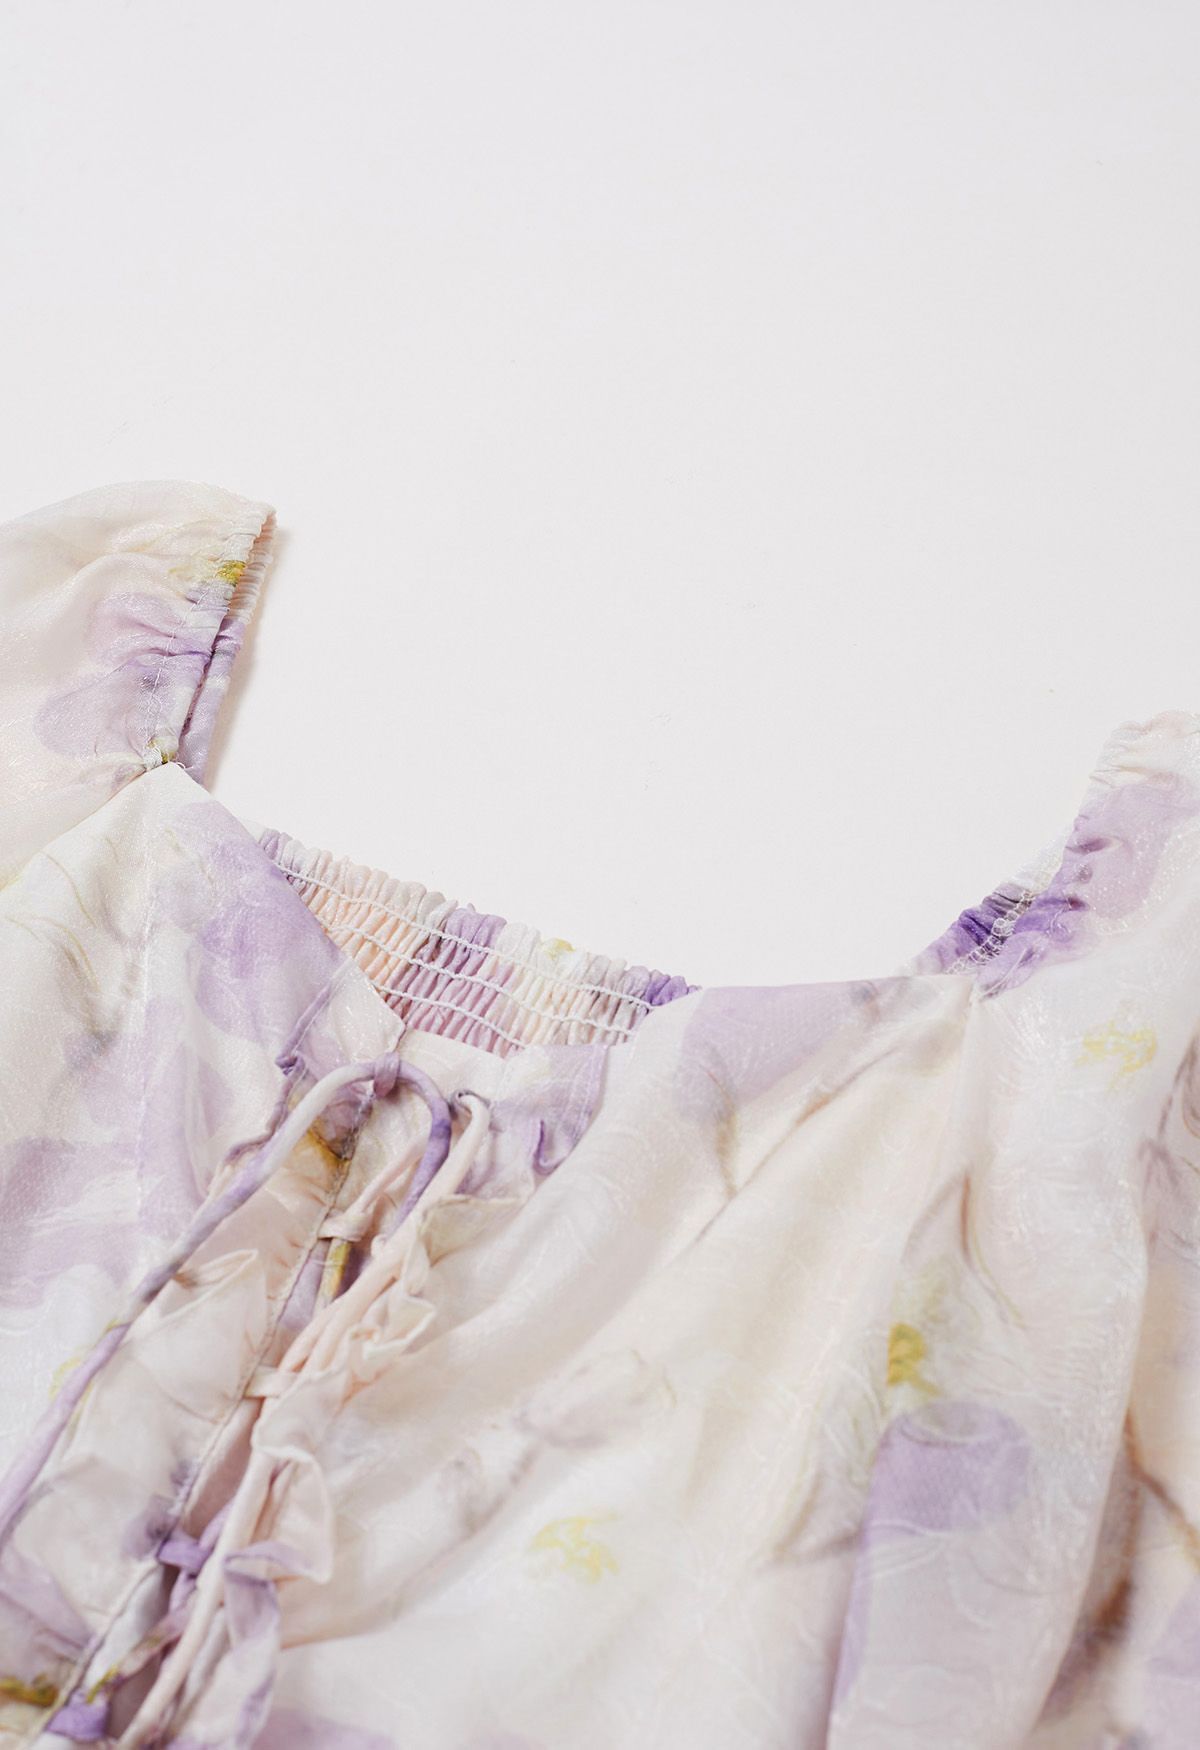 Step into Spring Floral Chiffon Midi Dress in Lilac